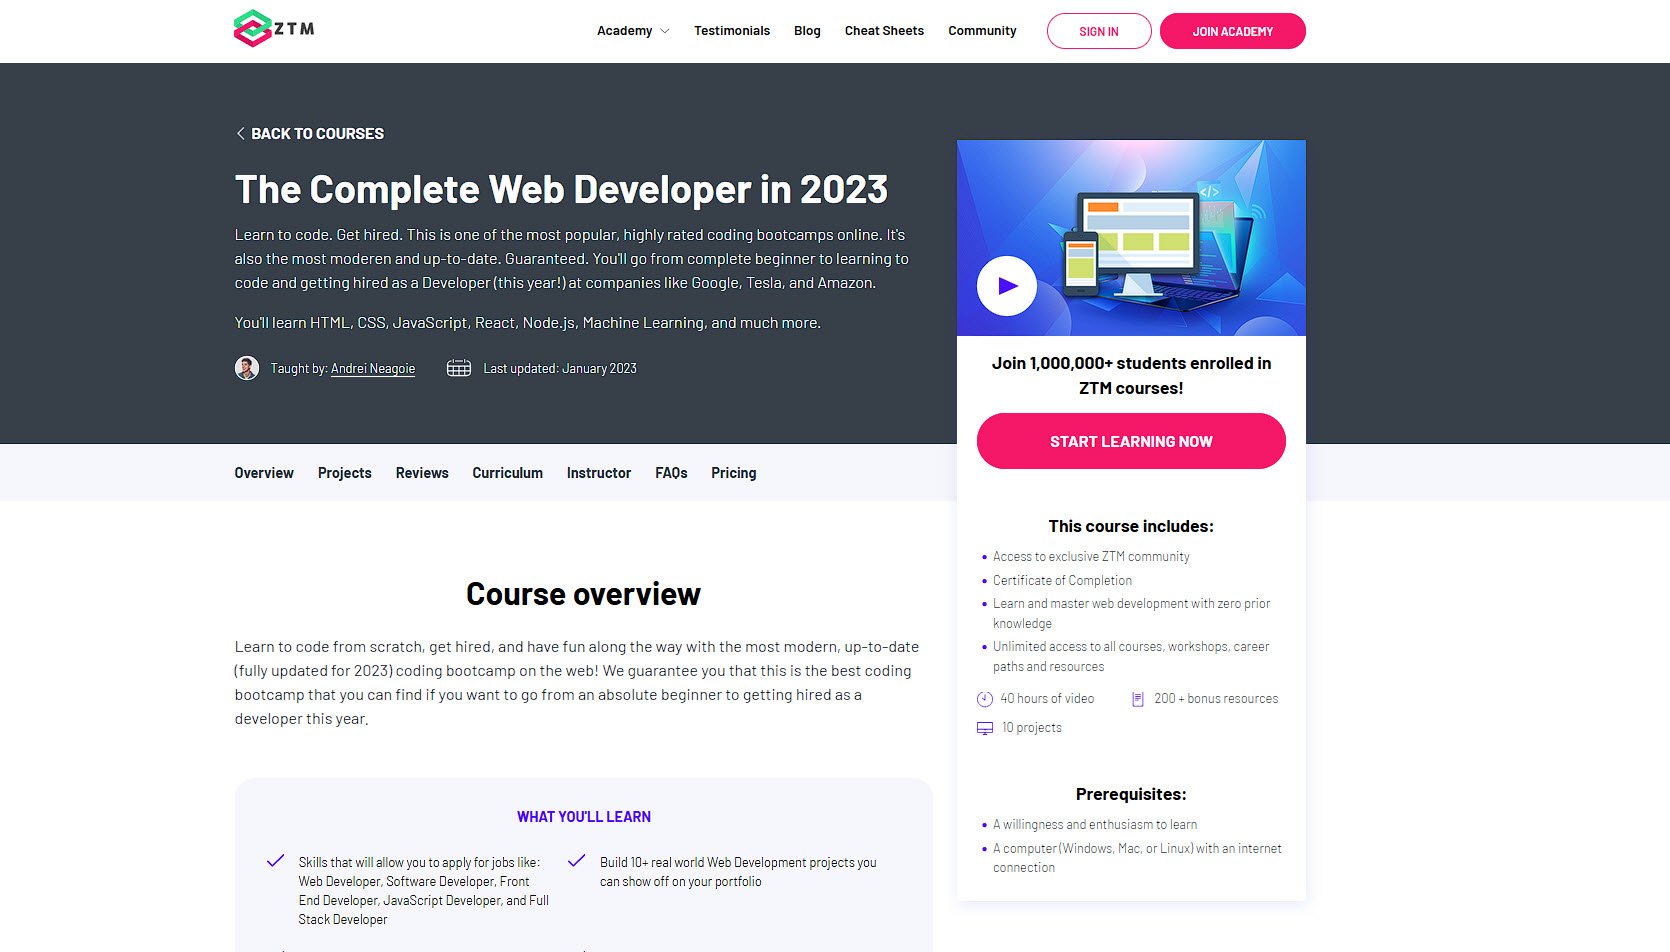 Become a web developer with no previous experience